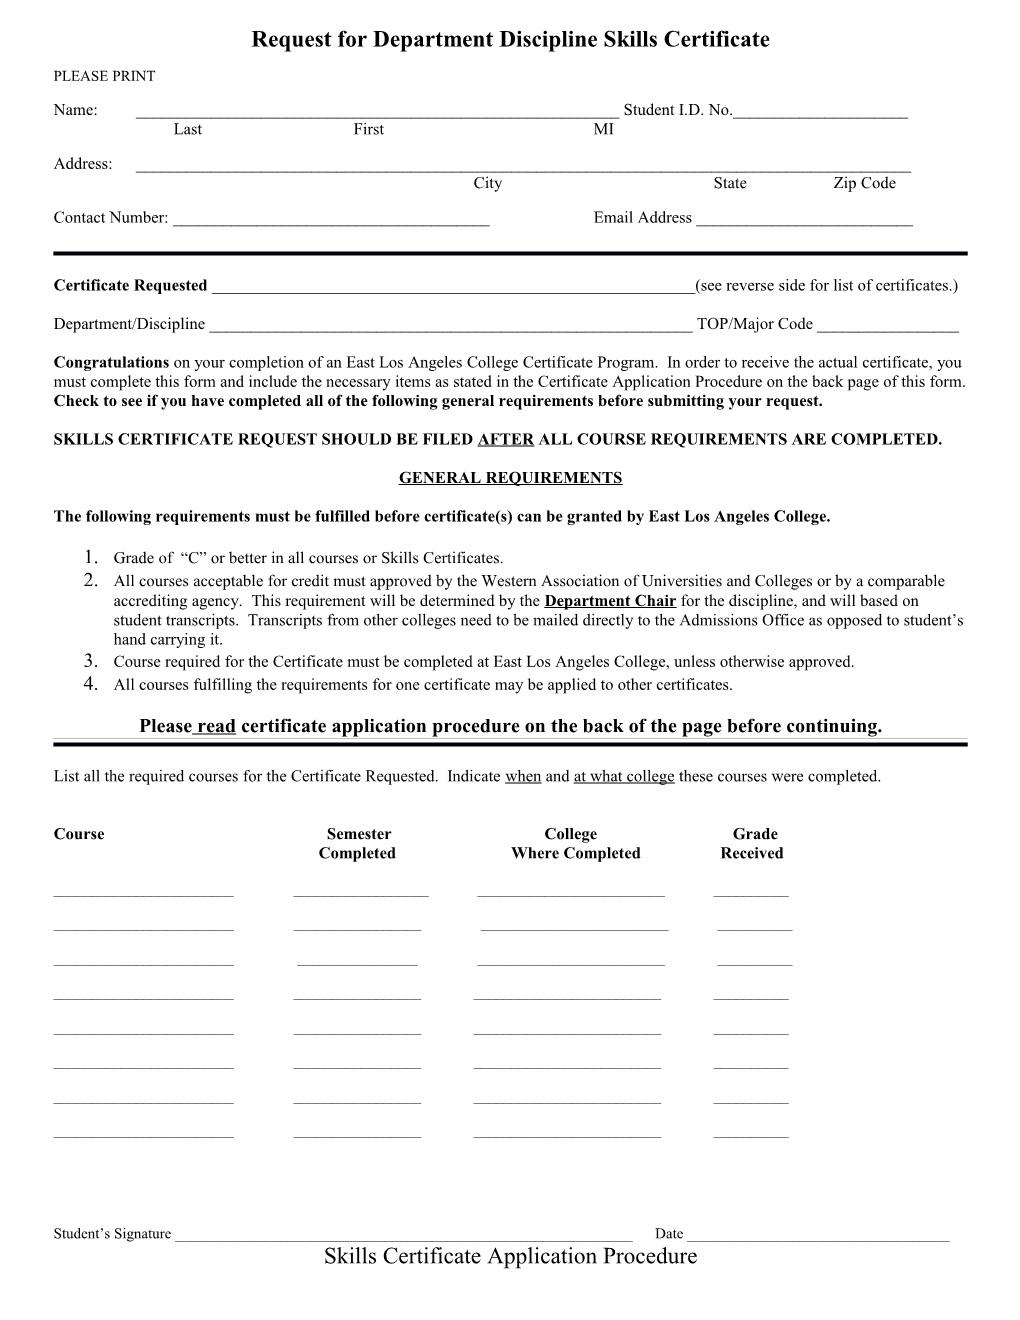 Request for Department Certificate of Completion